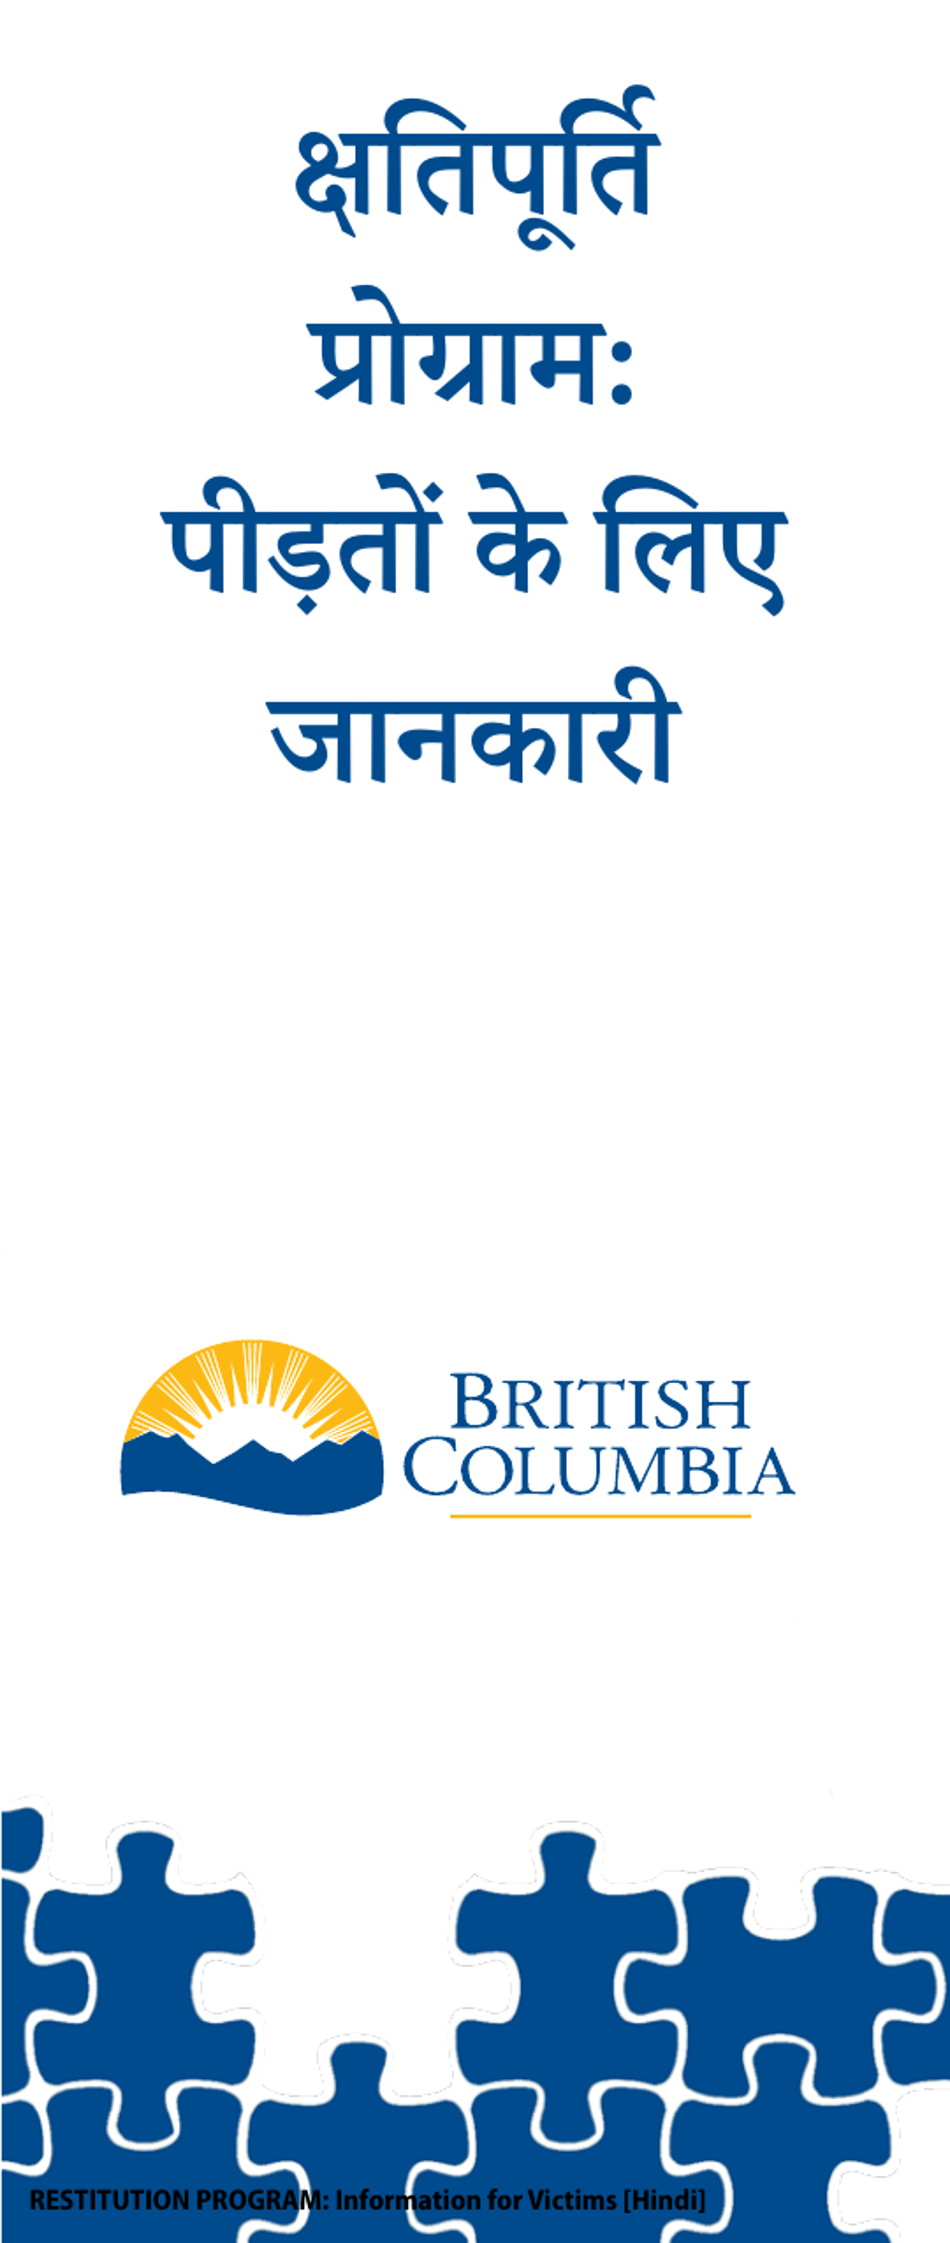 Restitution Program Application Form for Victims - British Columbia, Canada (English / Hindi), Page 1